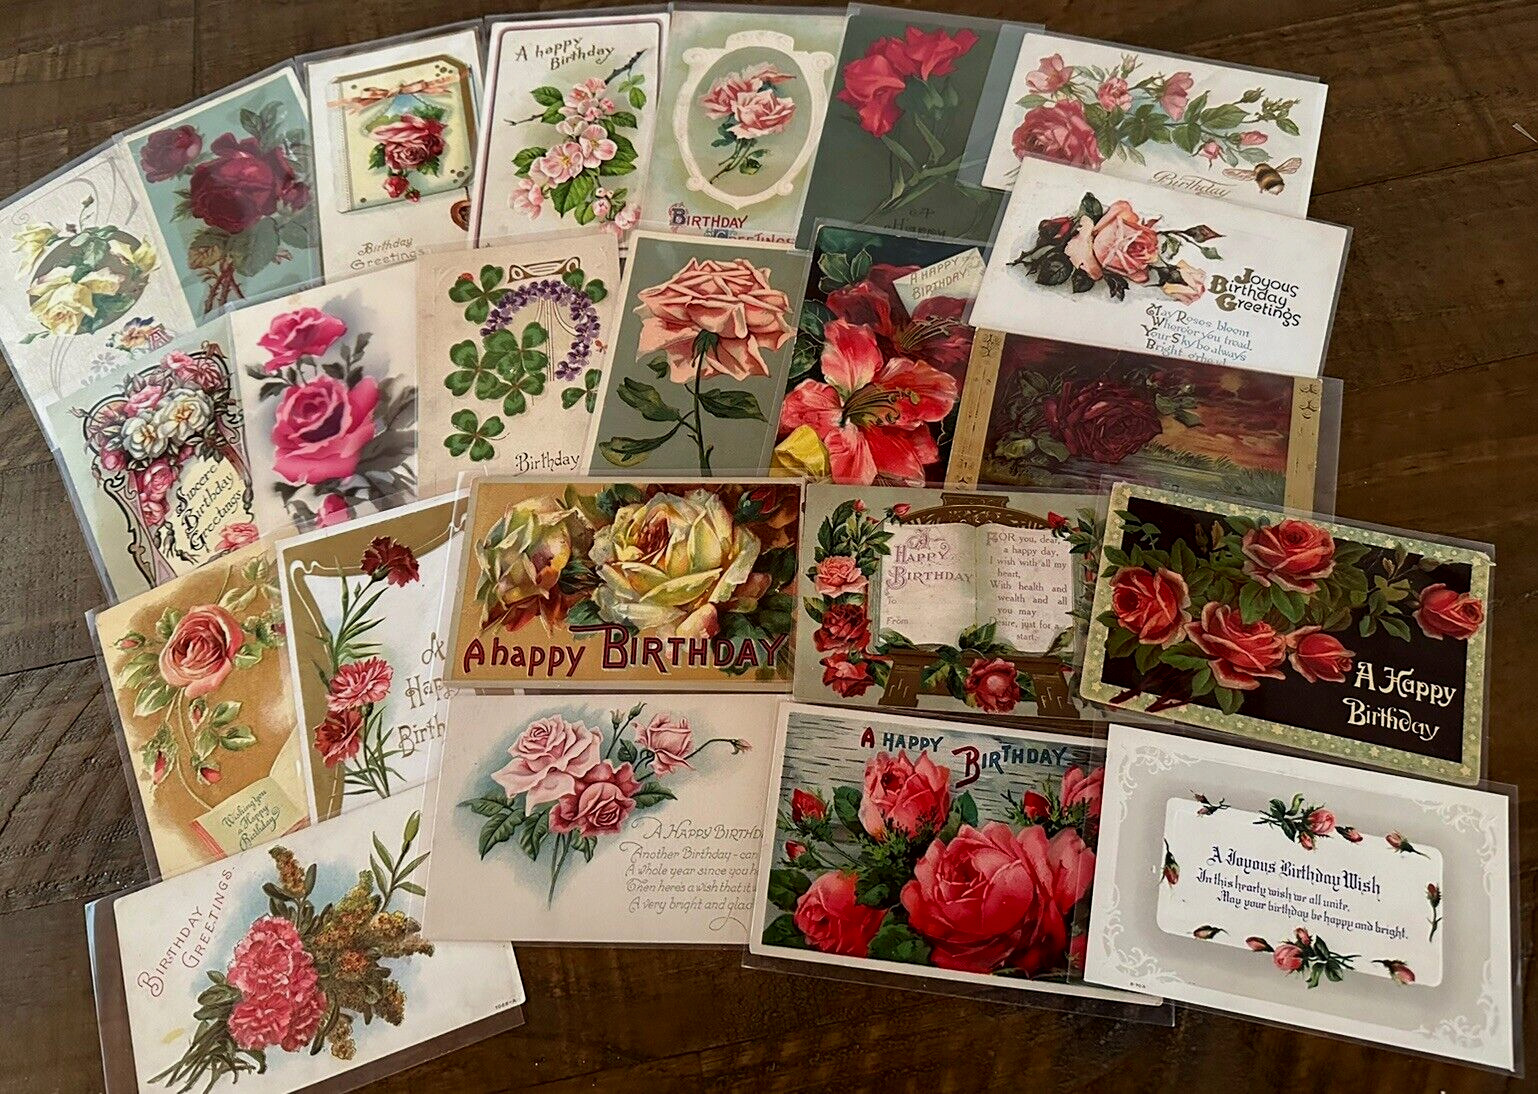 Lot of 23 Vintage~ BIRTHDAY~Greetings Postcards with Roses & Flowers~h-687